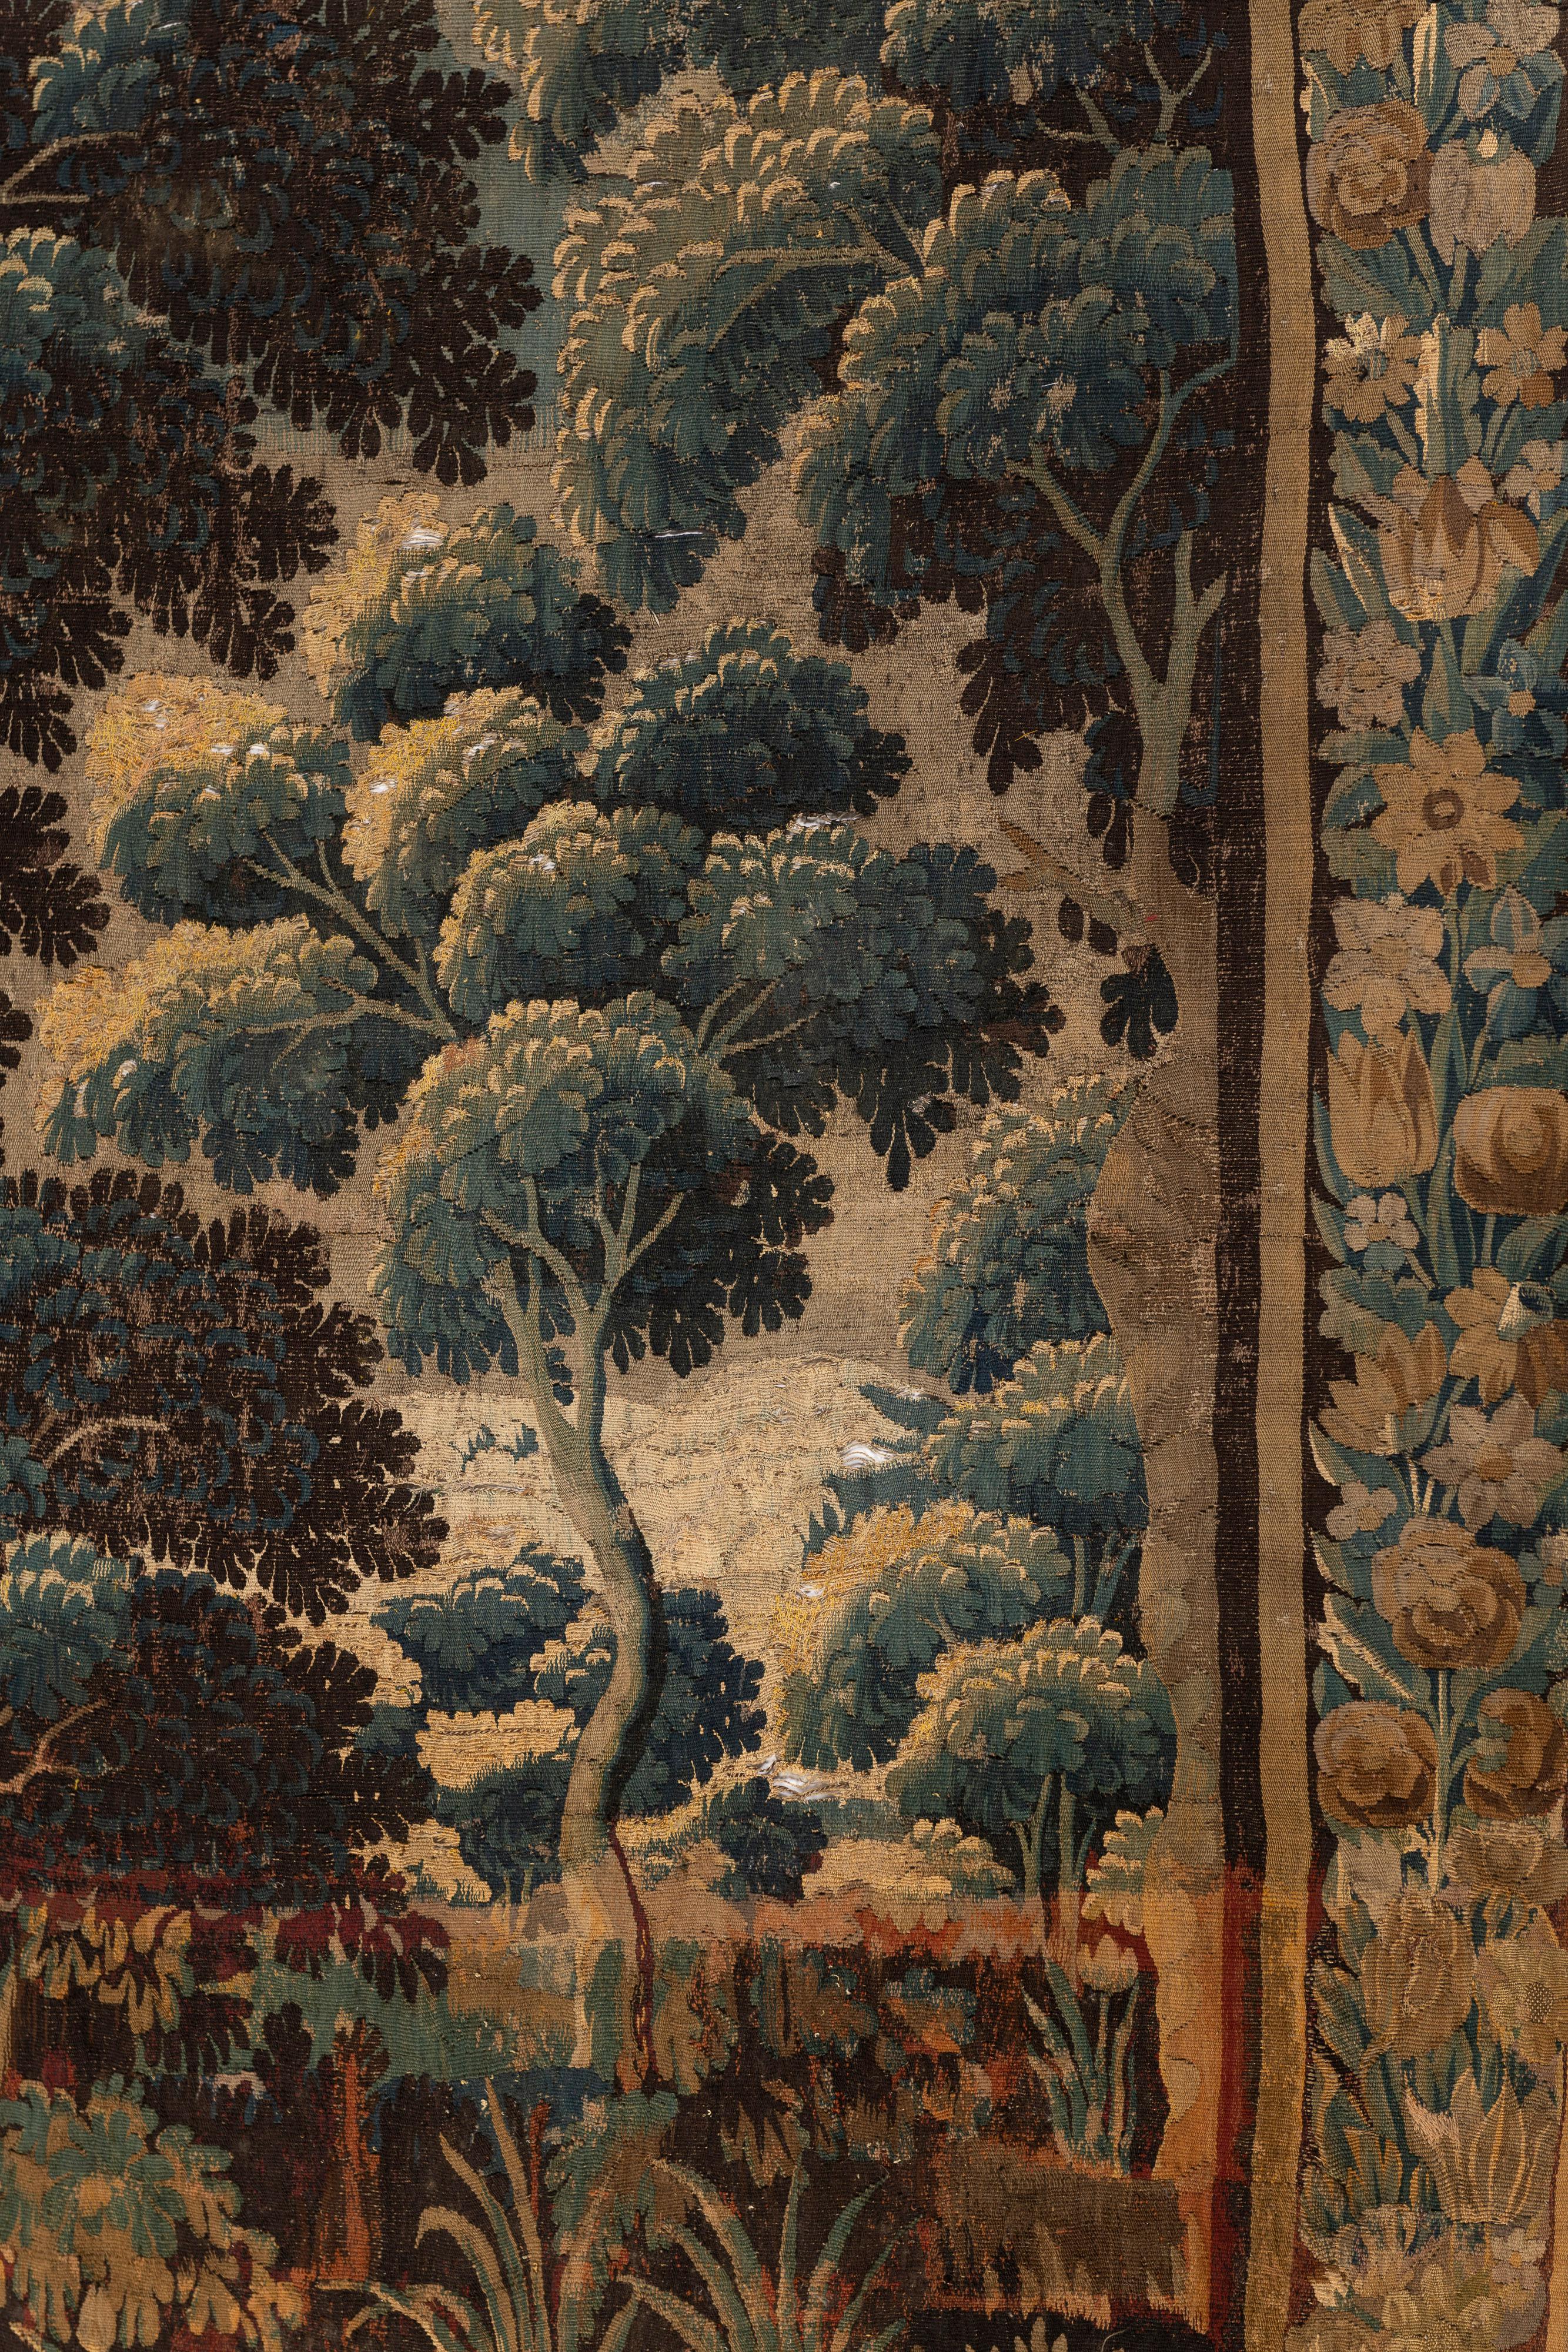 Large Classical French Tapestry, hand-woven of a blend of silk, wool and linen, features a serene landscape with a lovely floral border. The flowers, trees and sky are created in lush, muted hues of blue, green, brown and gold. Enhance your space by